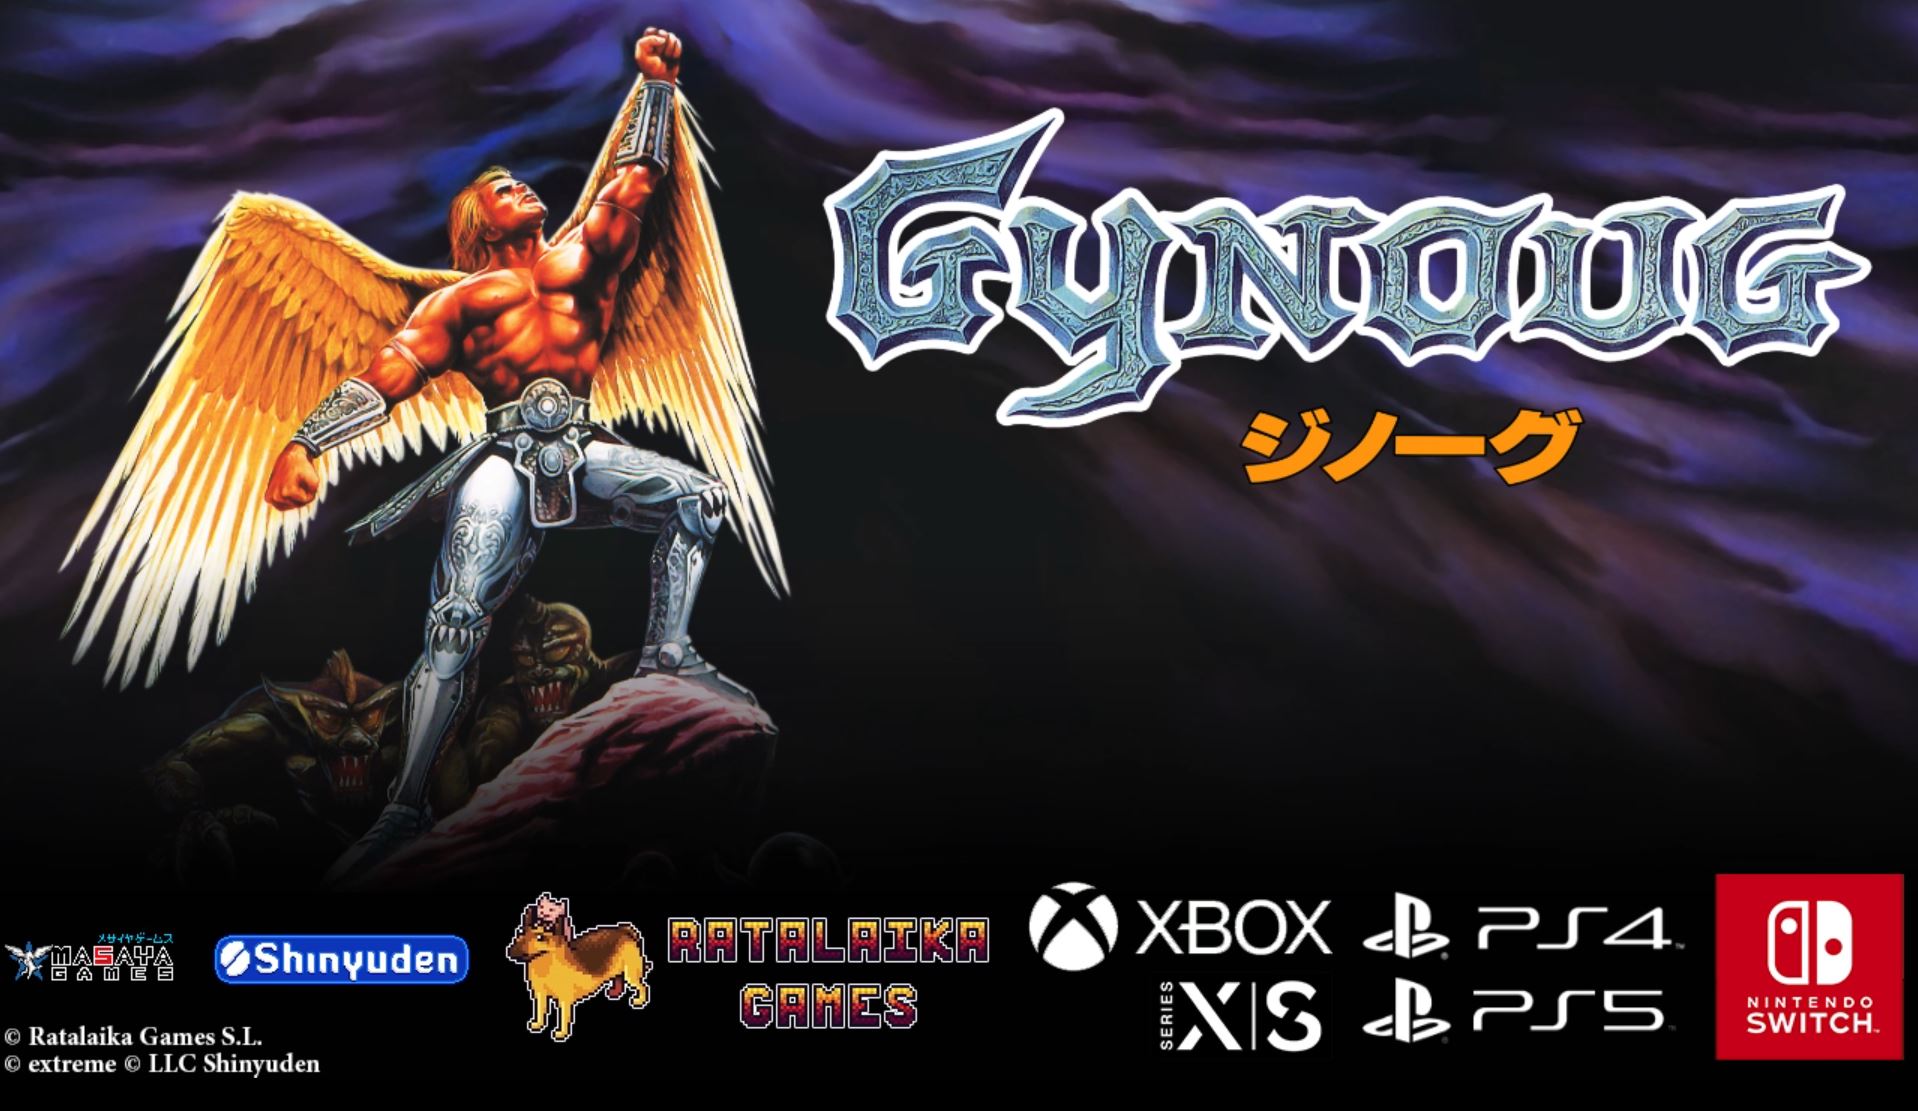 Gynoug is Getting Re-Released